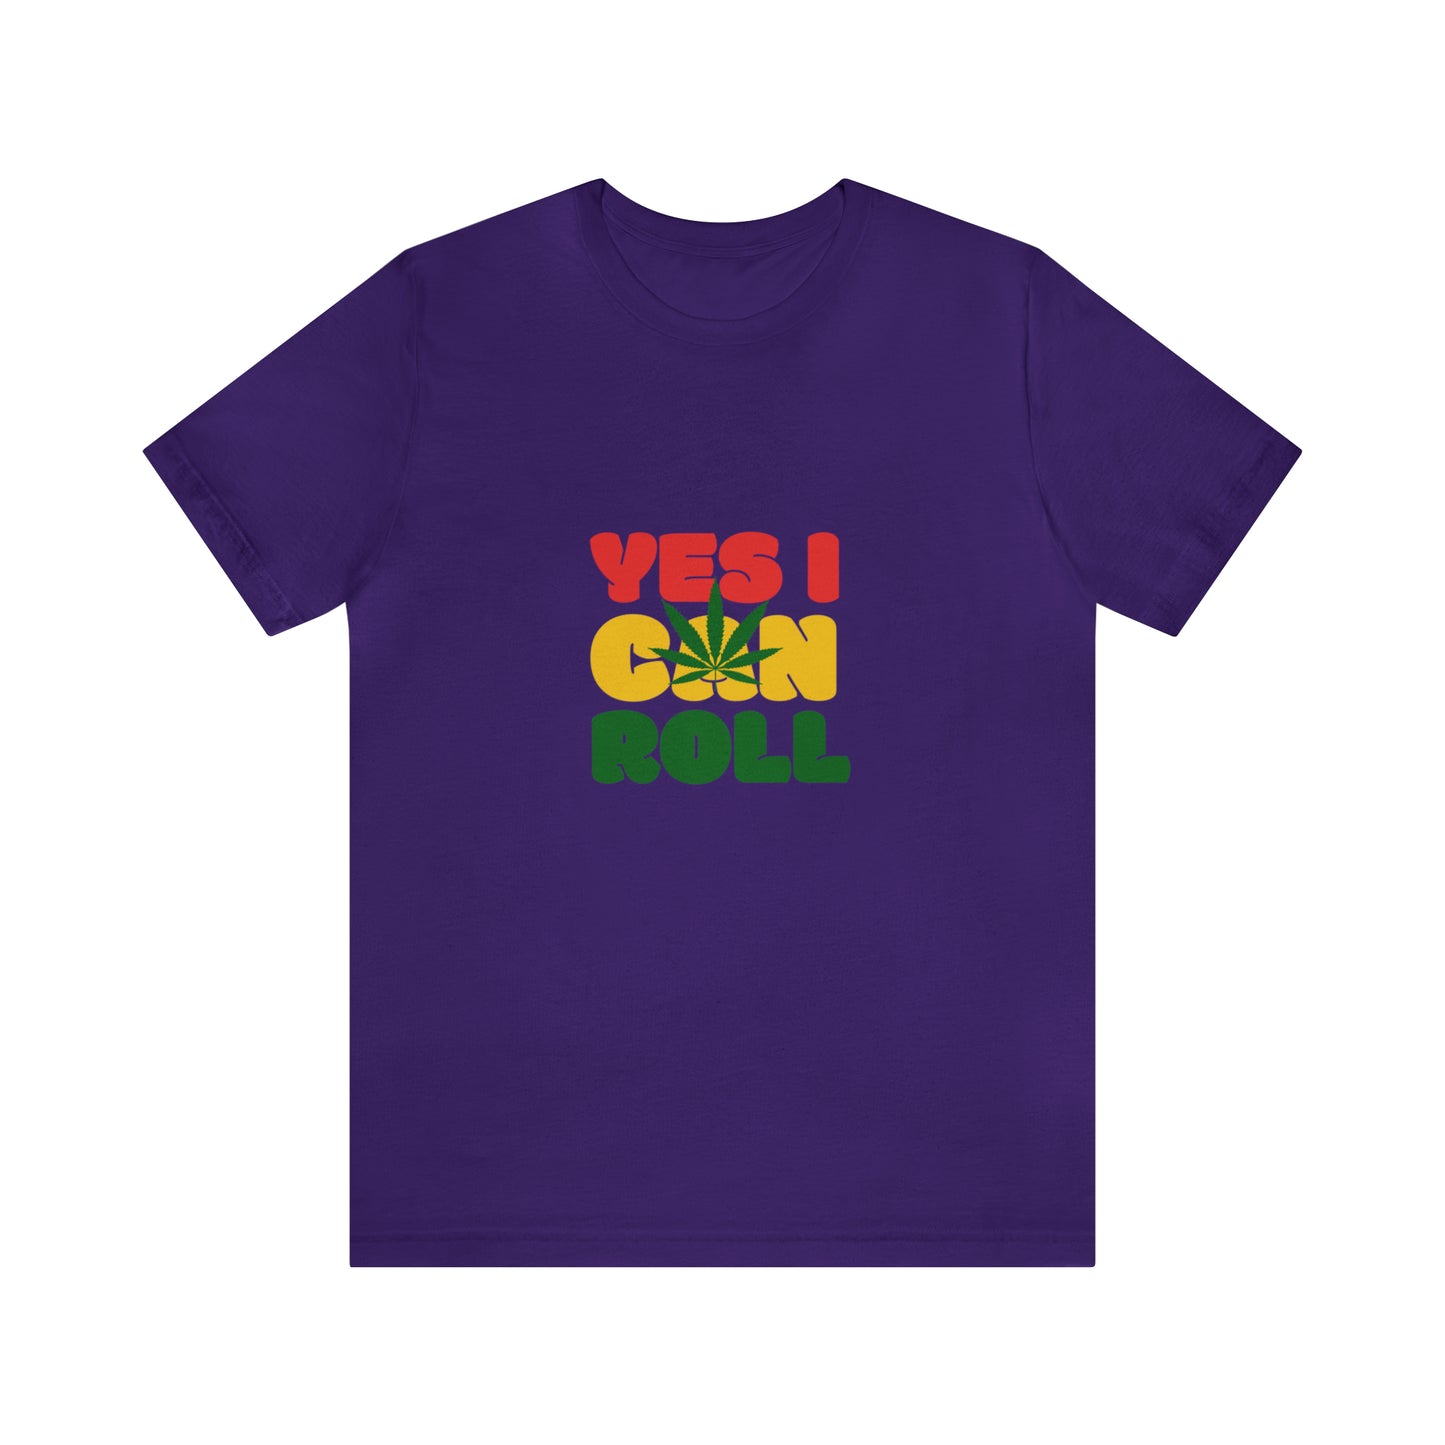 Yes, I Can Roll, Unisex Jersey Short Sleeve Tee